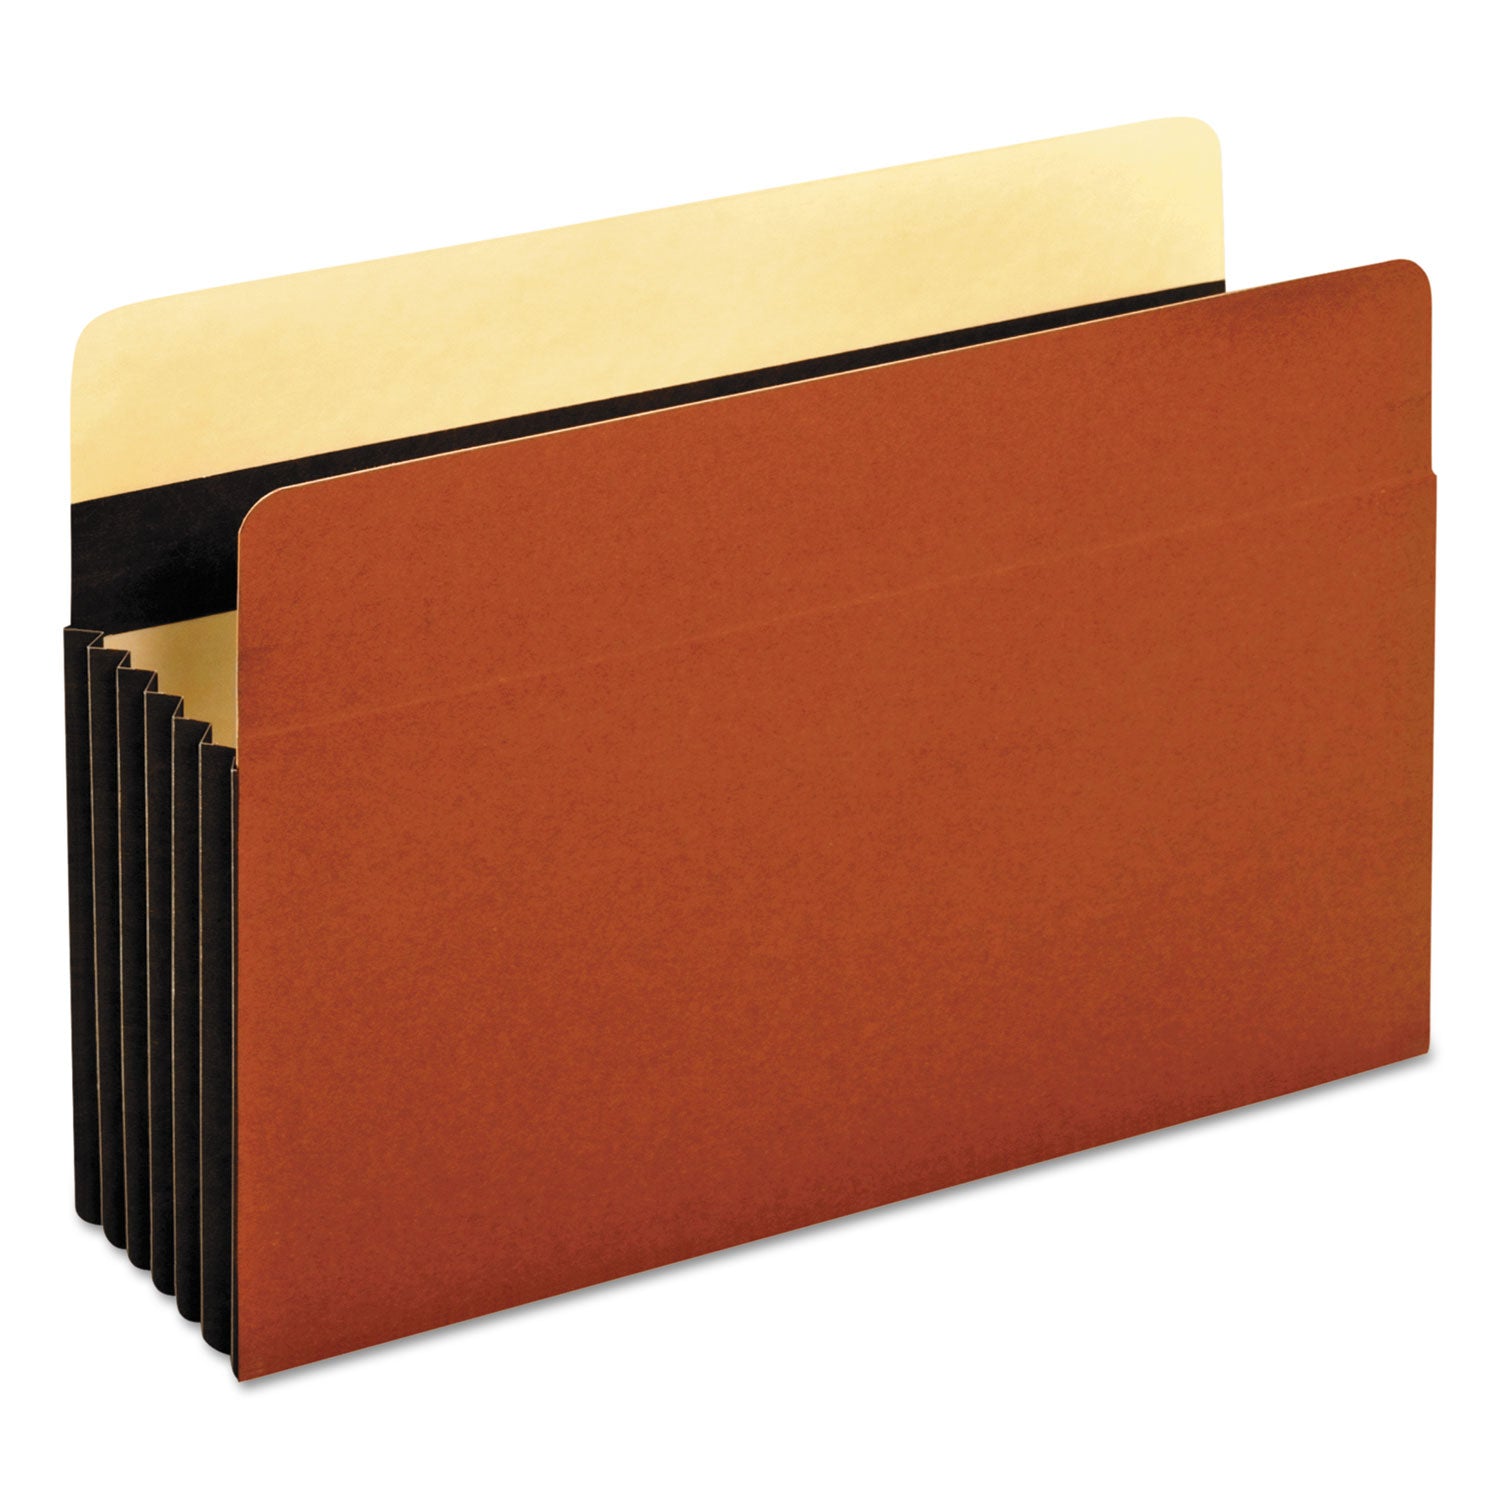 heavy-duty-file-pockets-525-expansion-legal-size-redrope-10-box_pfxc1536ghd - 1